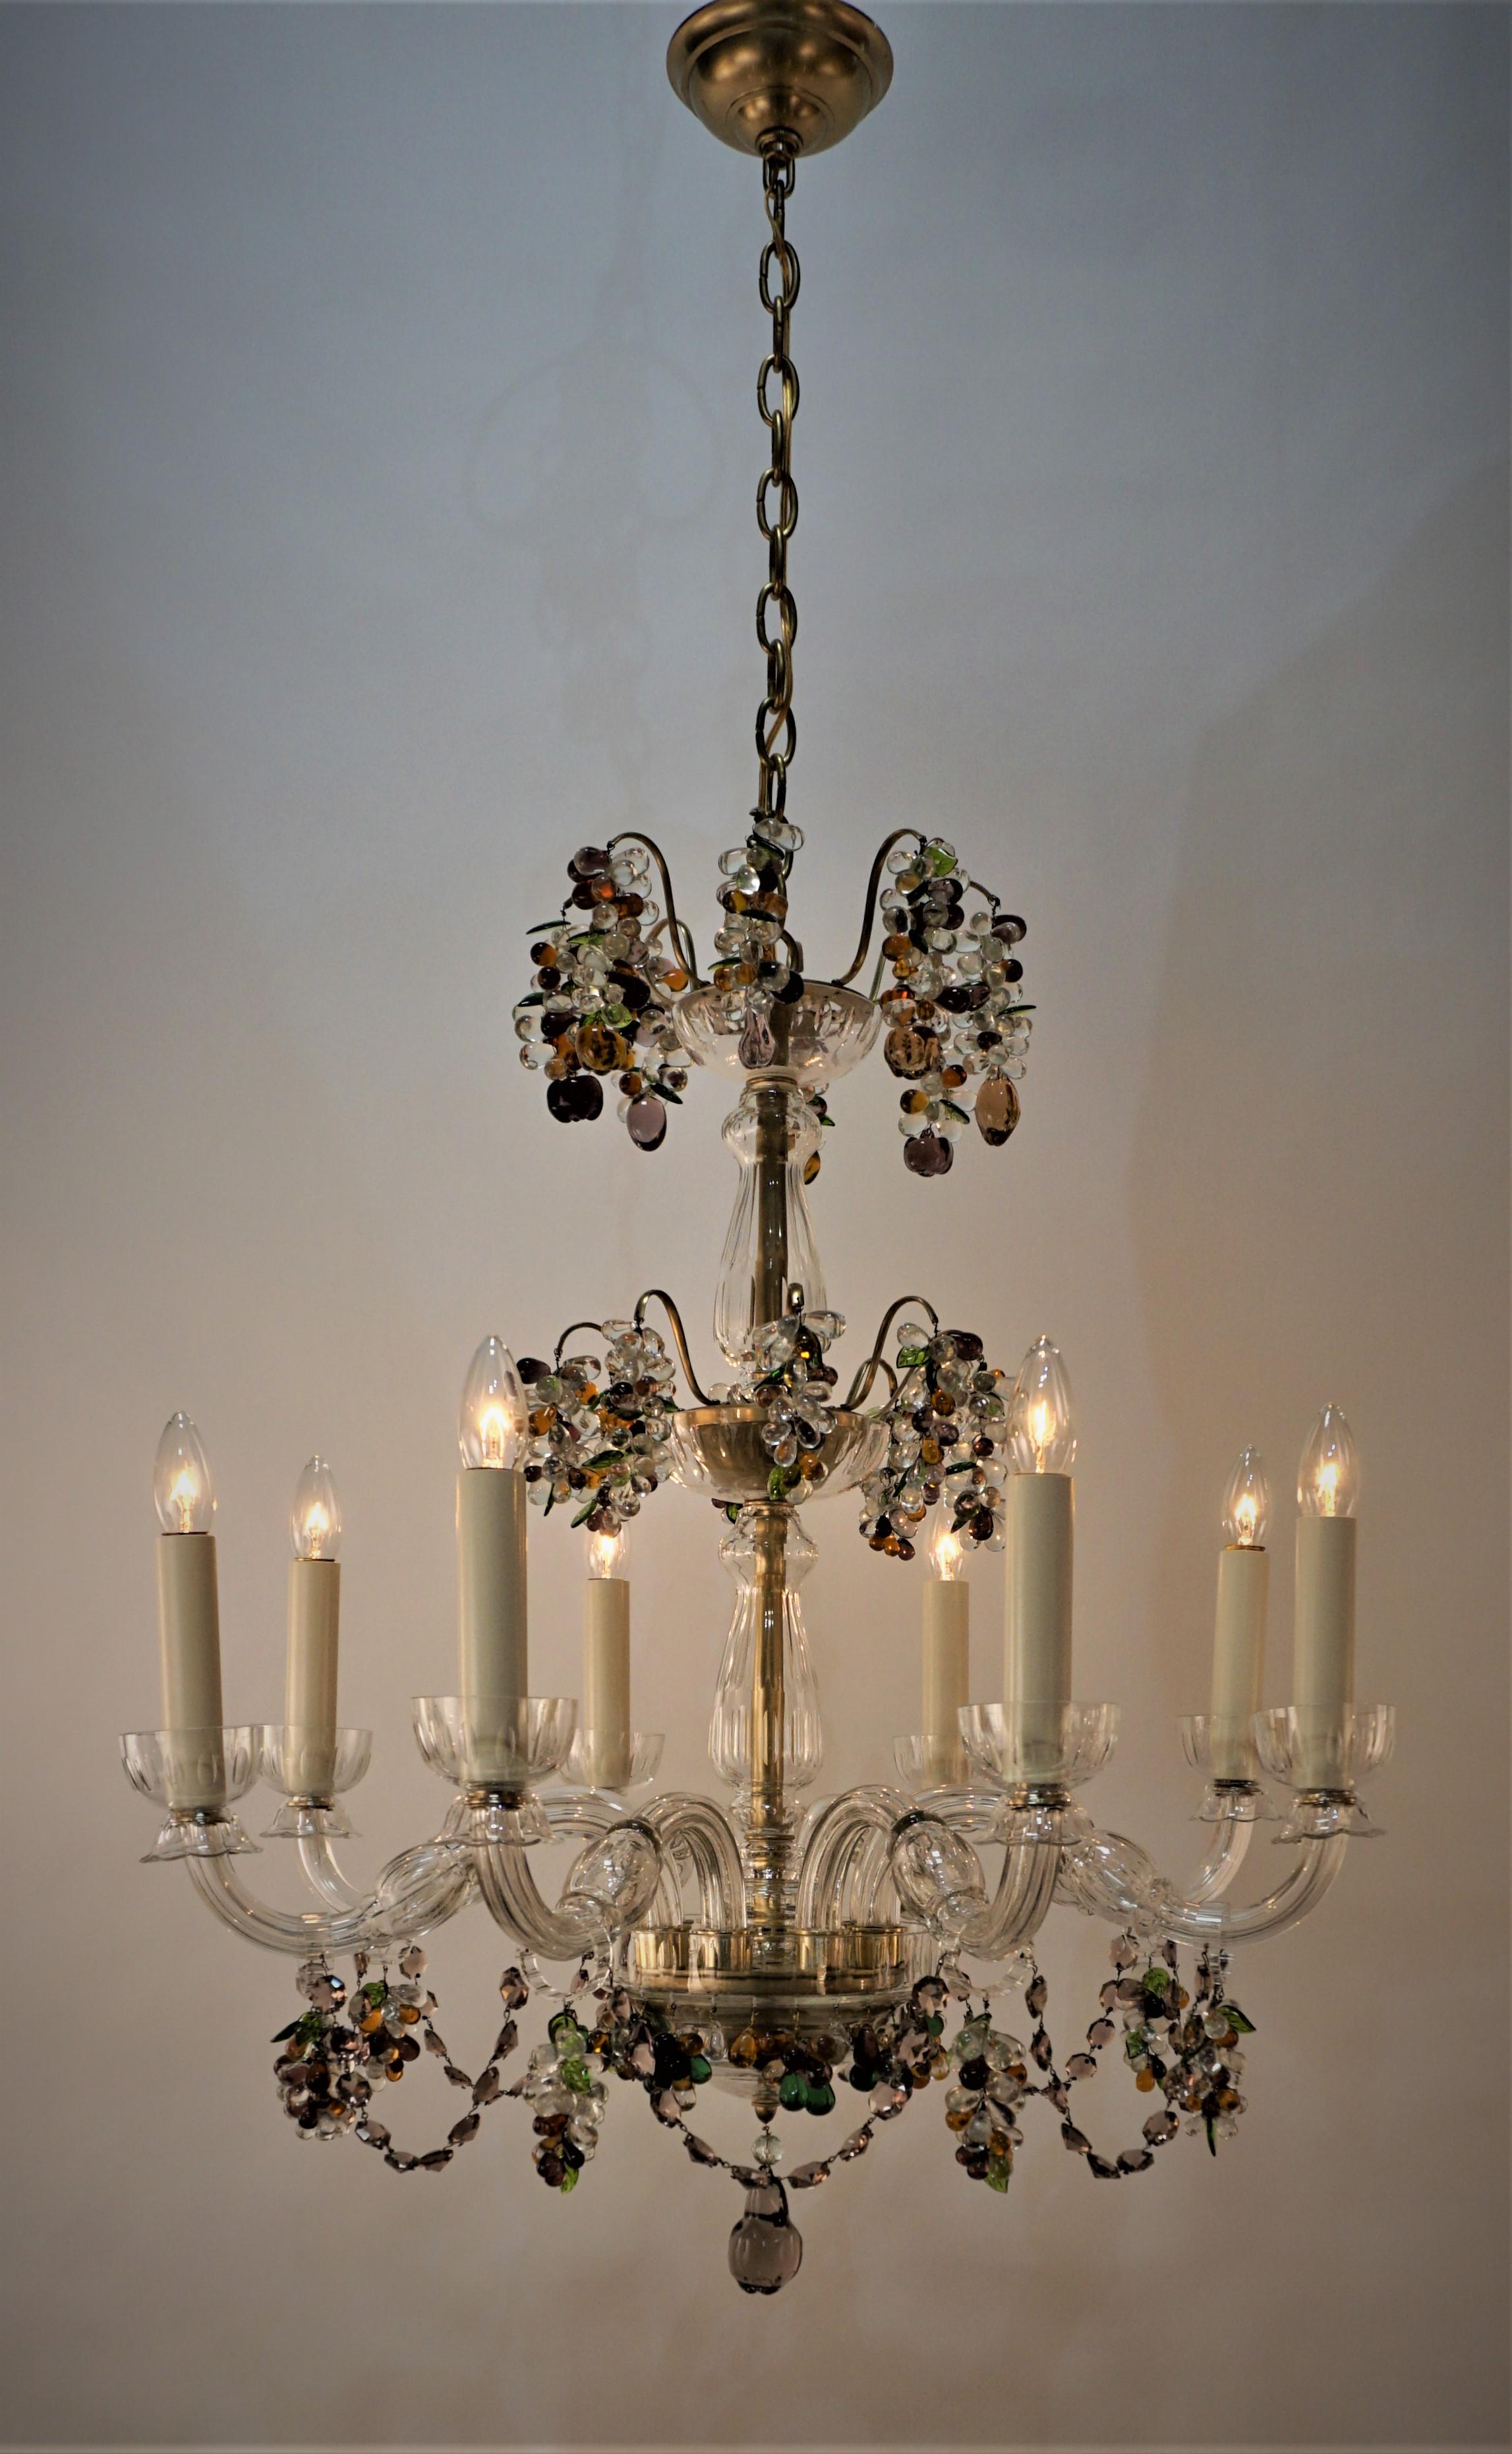 Beautiful eight arm cut crystal chandelier with colorful fruit crystal drops. 
Measurement: 30